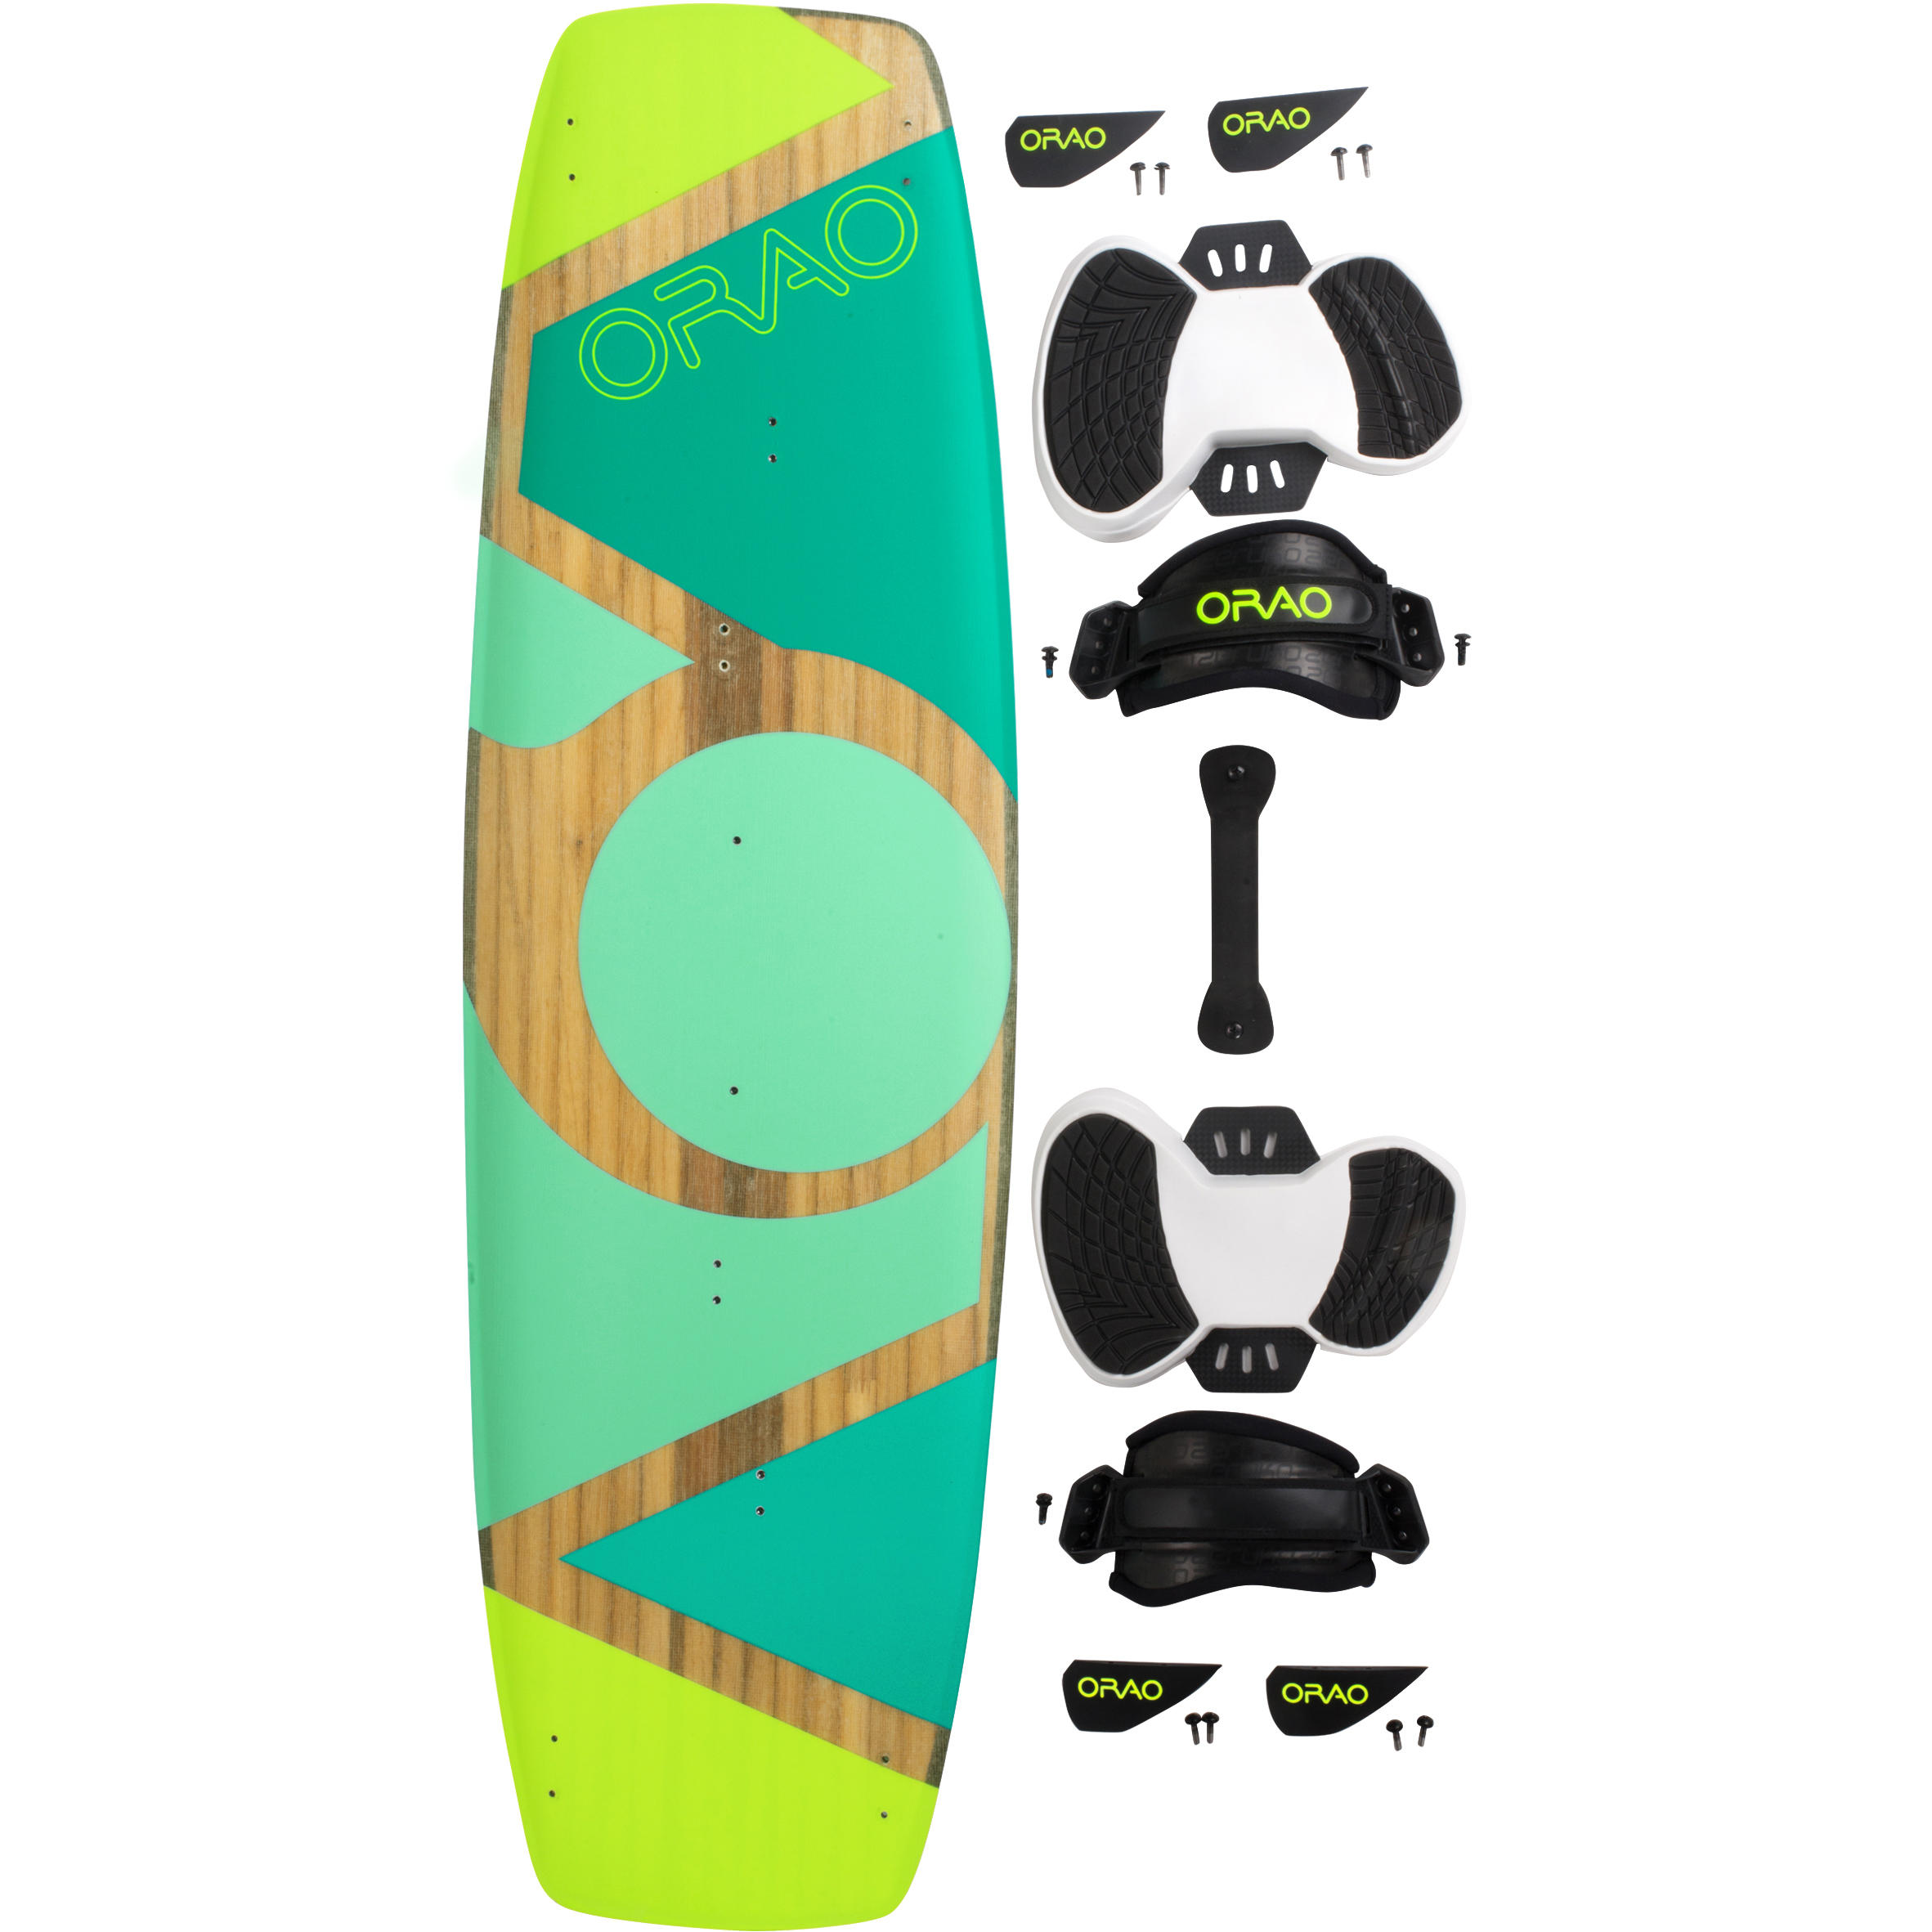 Twintip carbon kitesurf board 136 x 40.5 cm (pads and straps included) - TT500 10/30